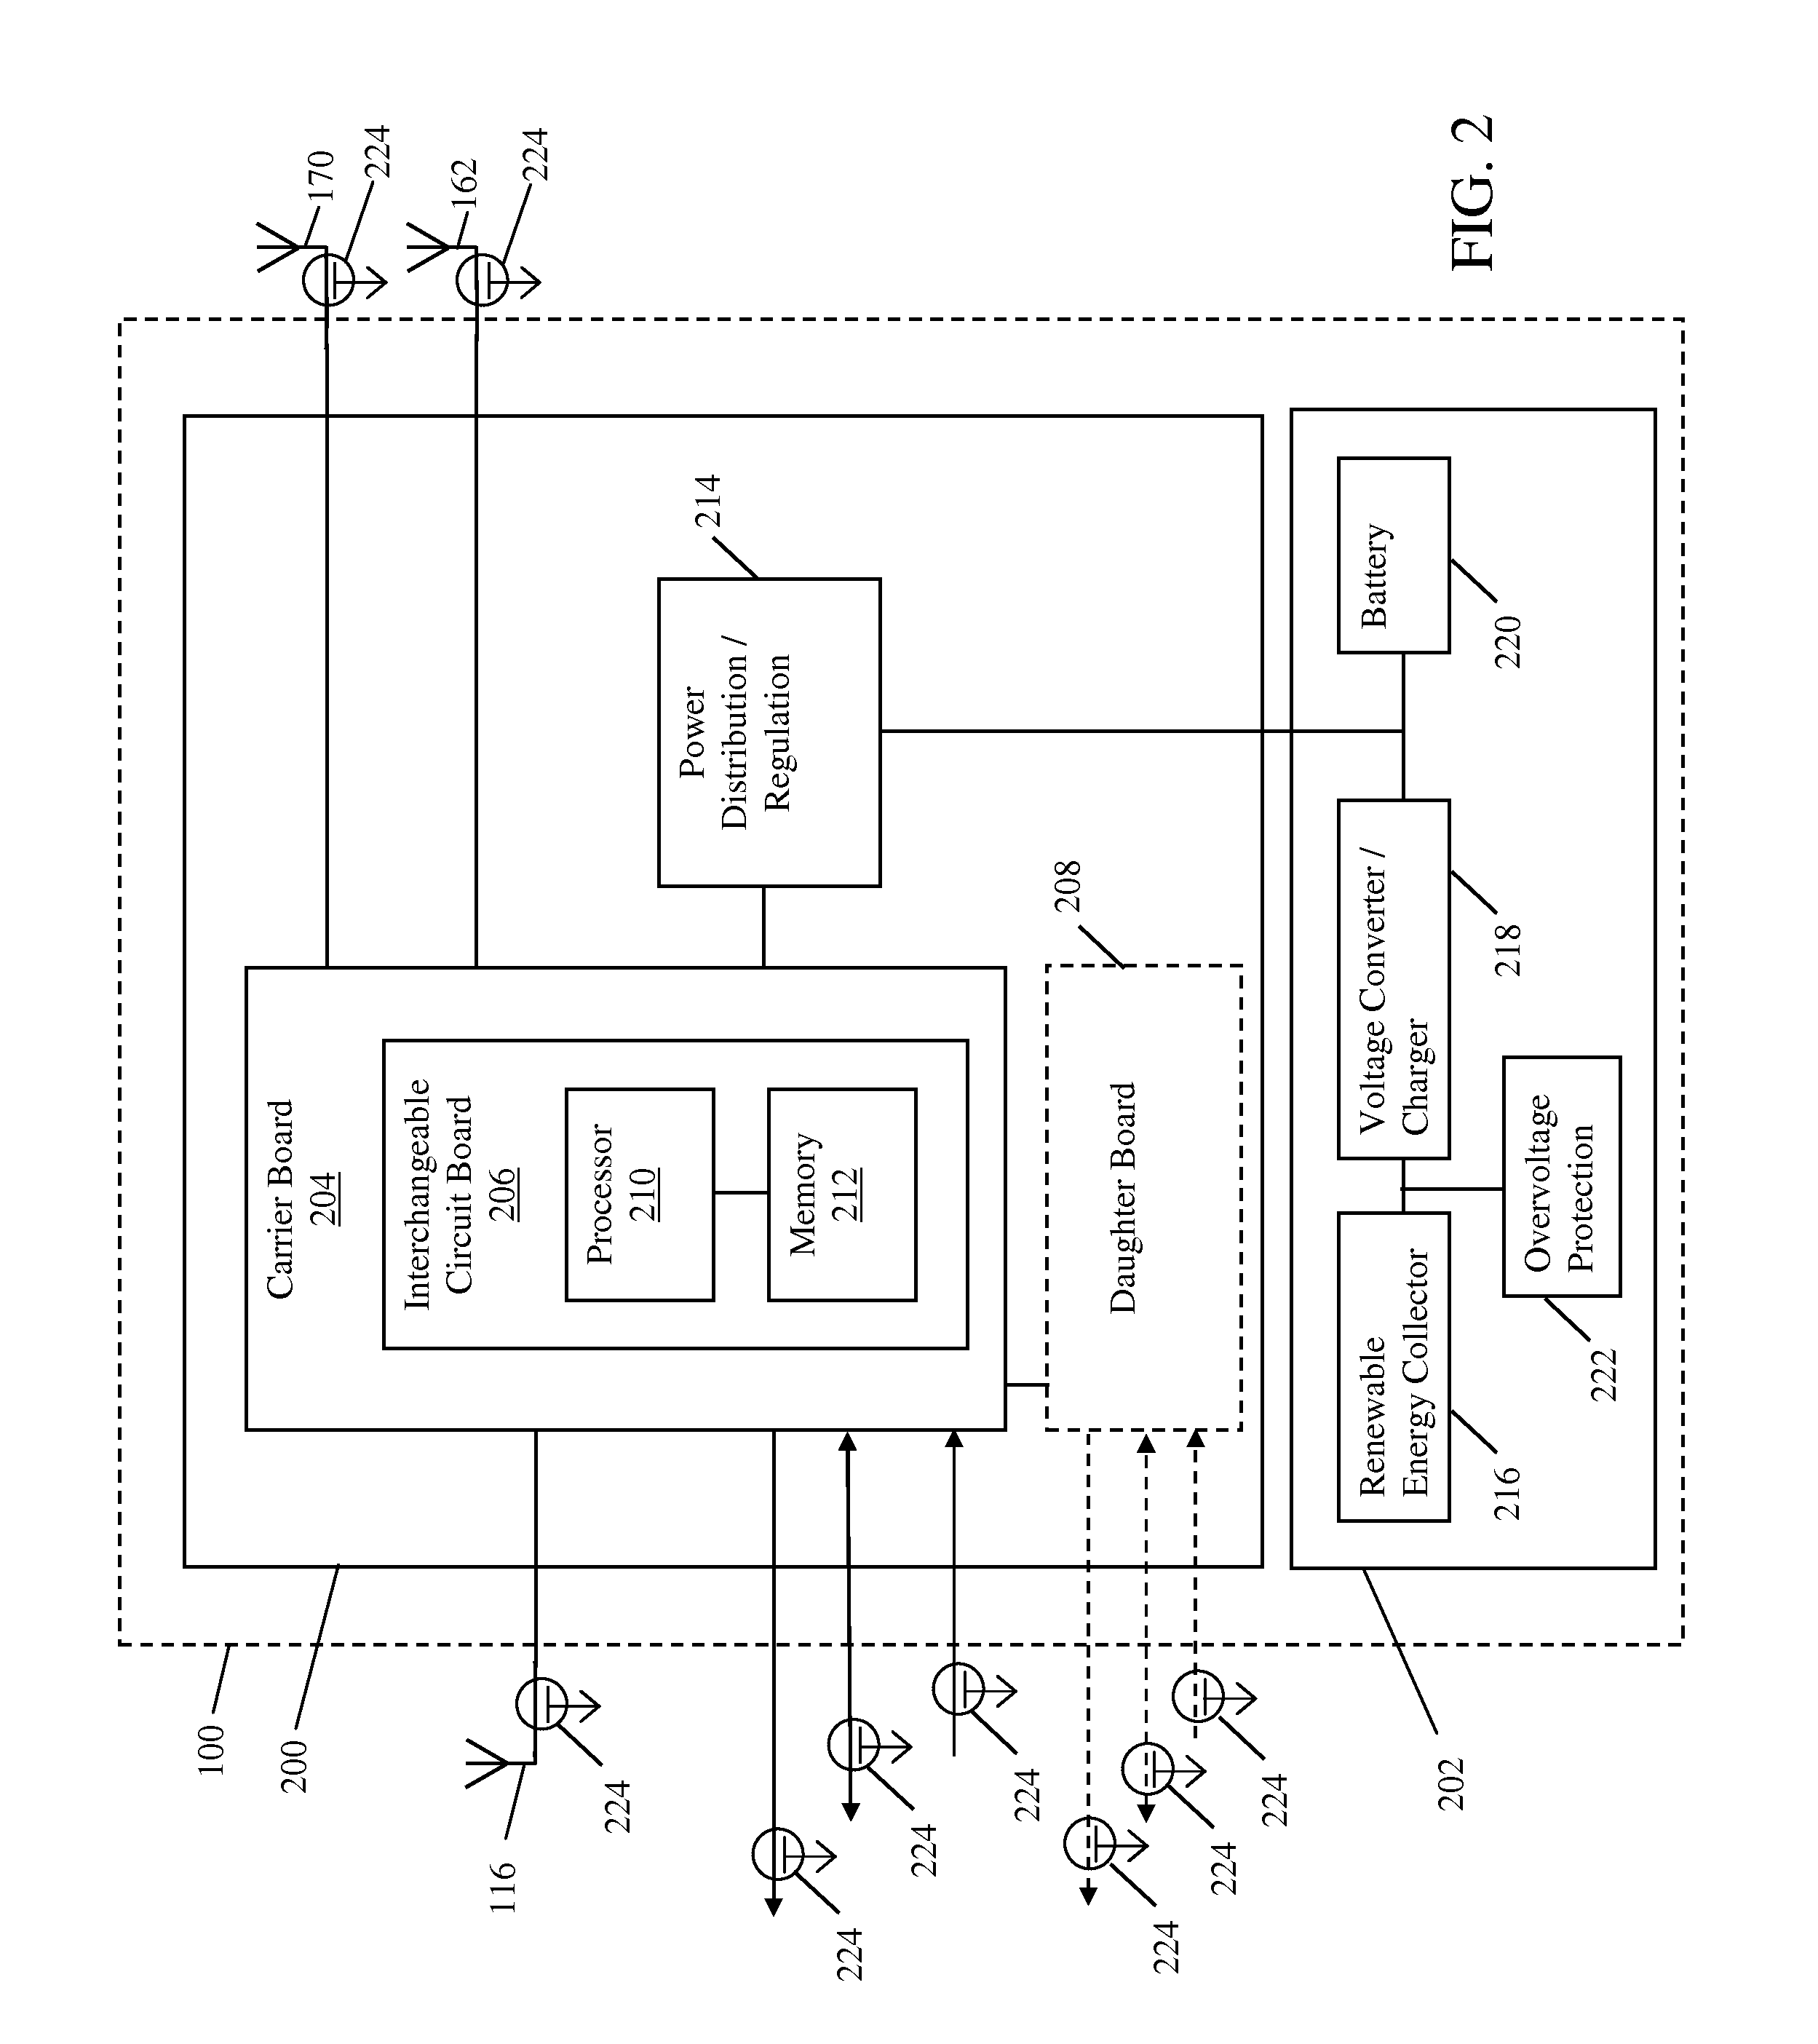 System And Method To Monitor And Control Remote Sensors And Equipment